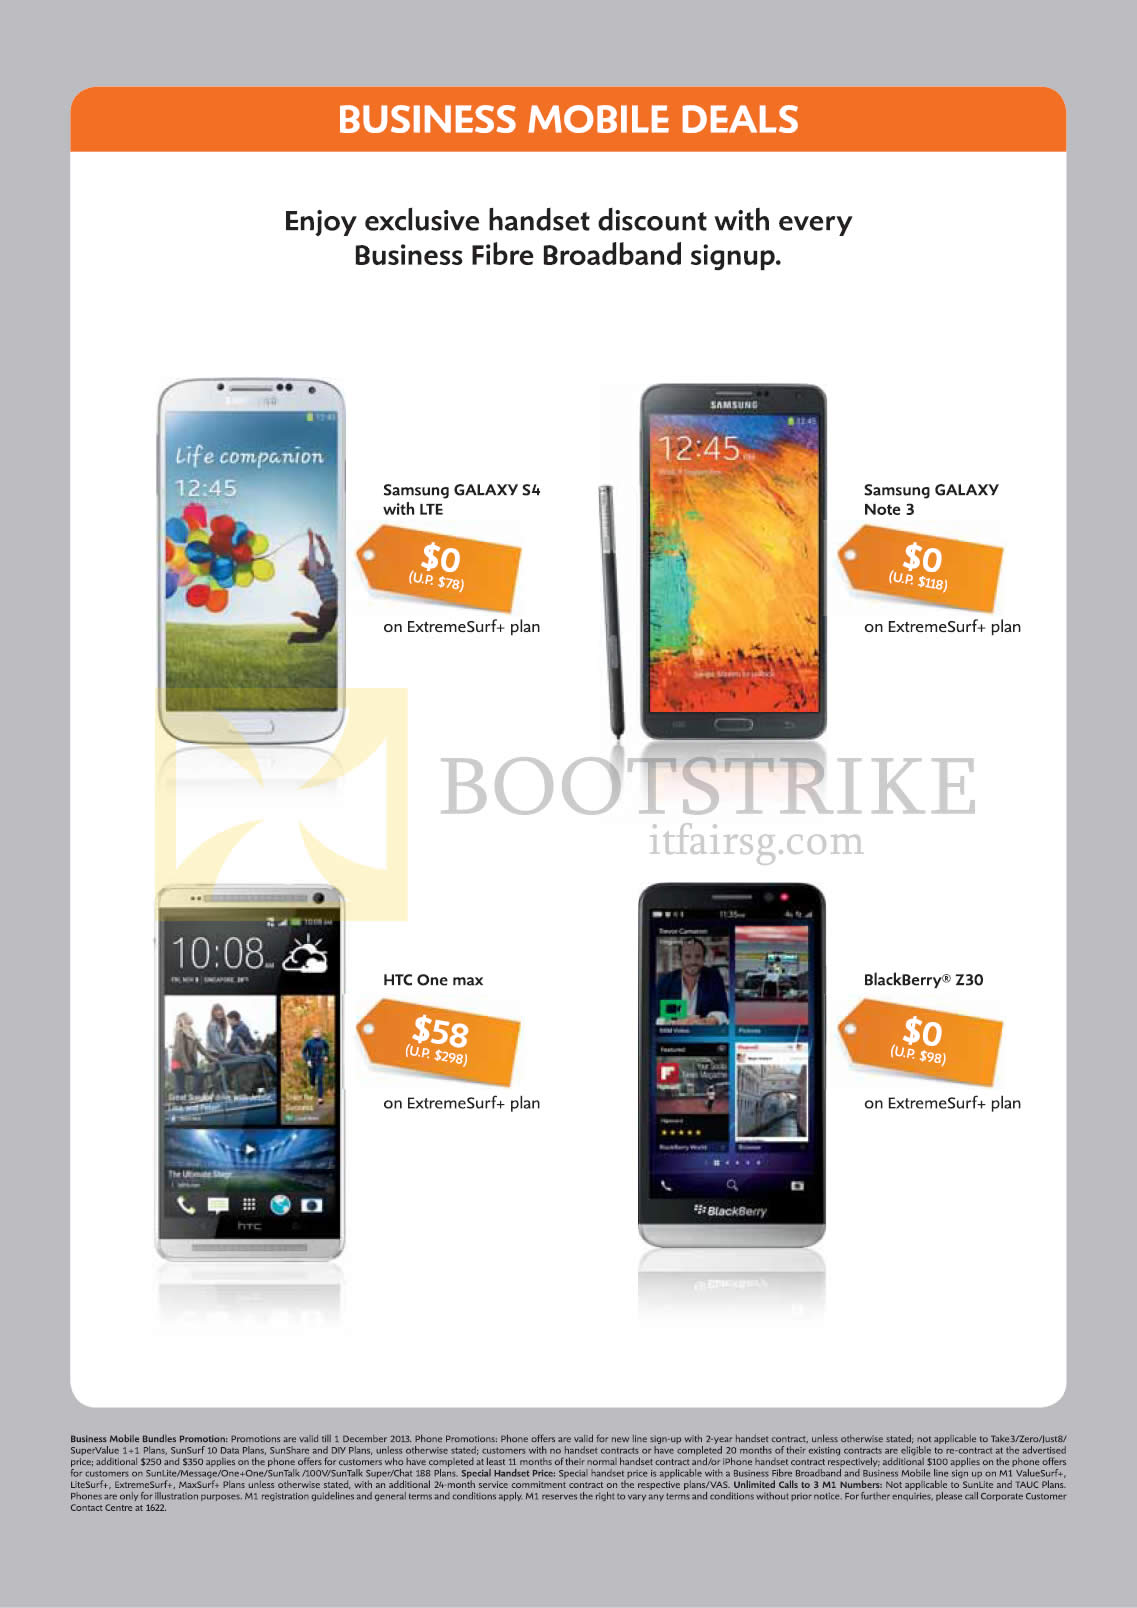 SITEX 2013 price list image brochure of M1 Business Mobile Deals Samsung Galaxy S4 LTE, Note 3, HTC One Max, Blackberry Z30